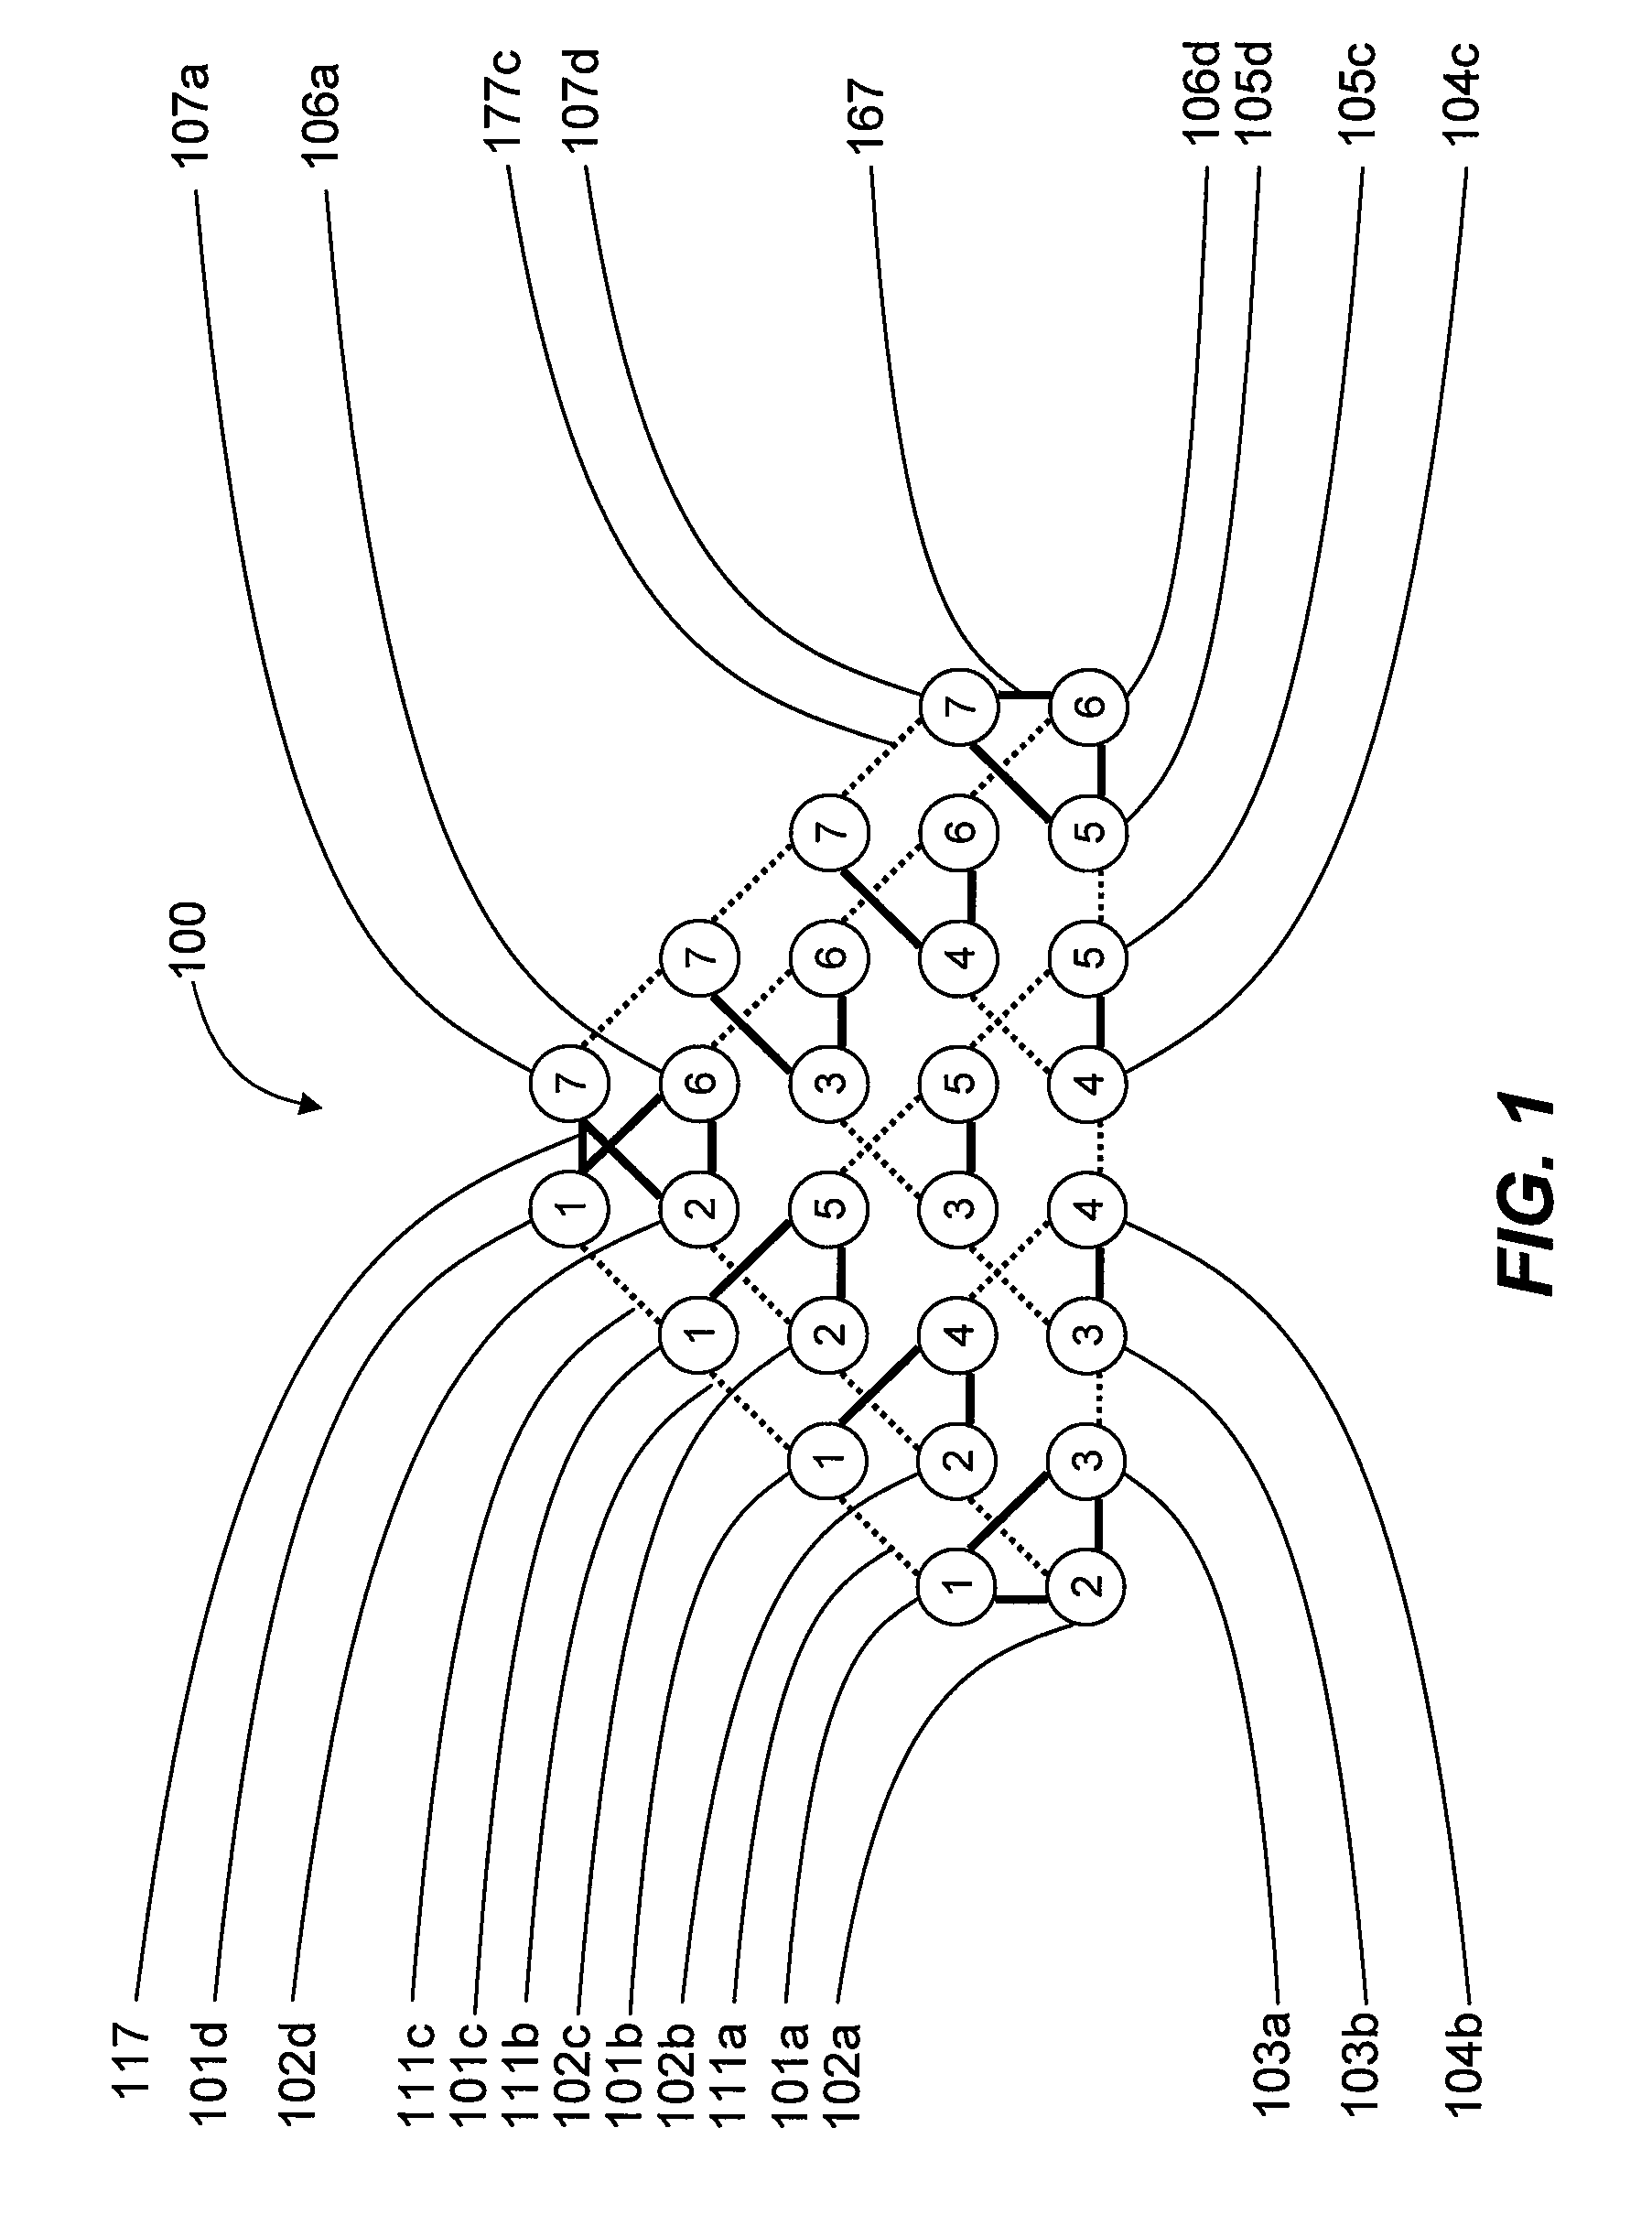 Systems, devices, and methods for analog processing